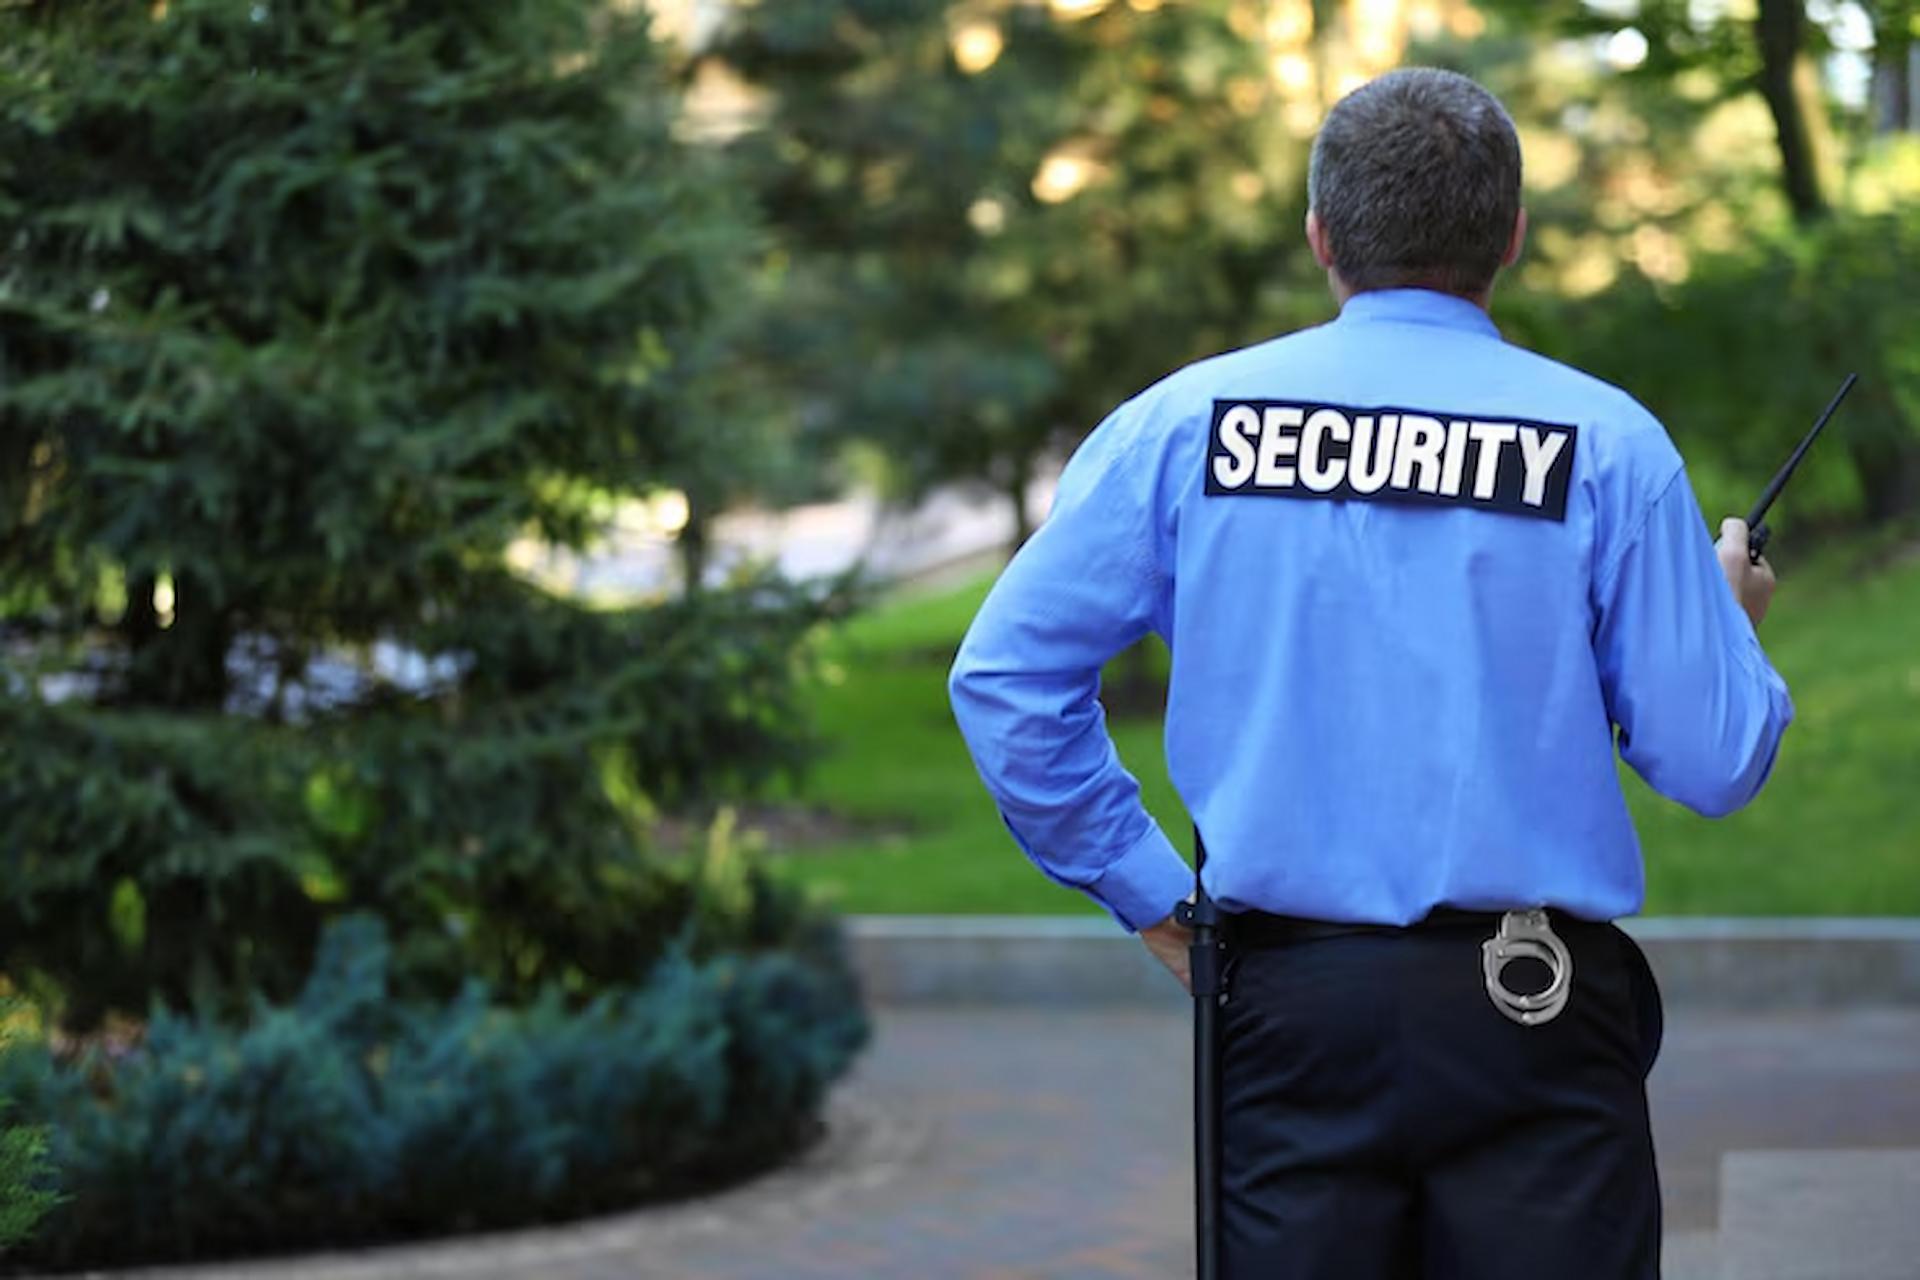 Creating a Strong Security Culture in Your Organization